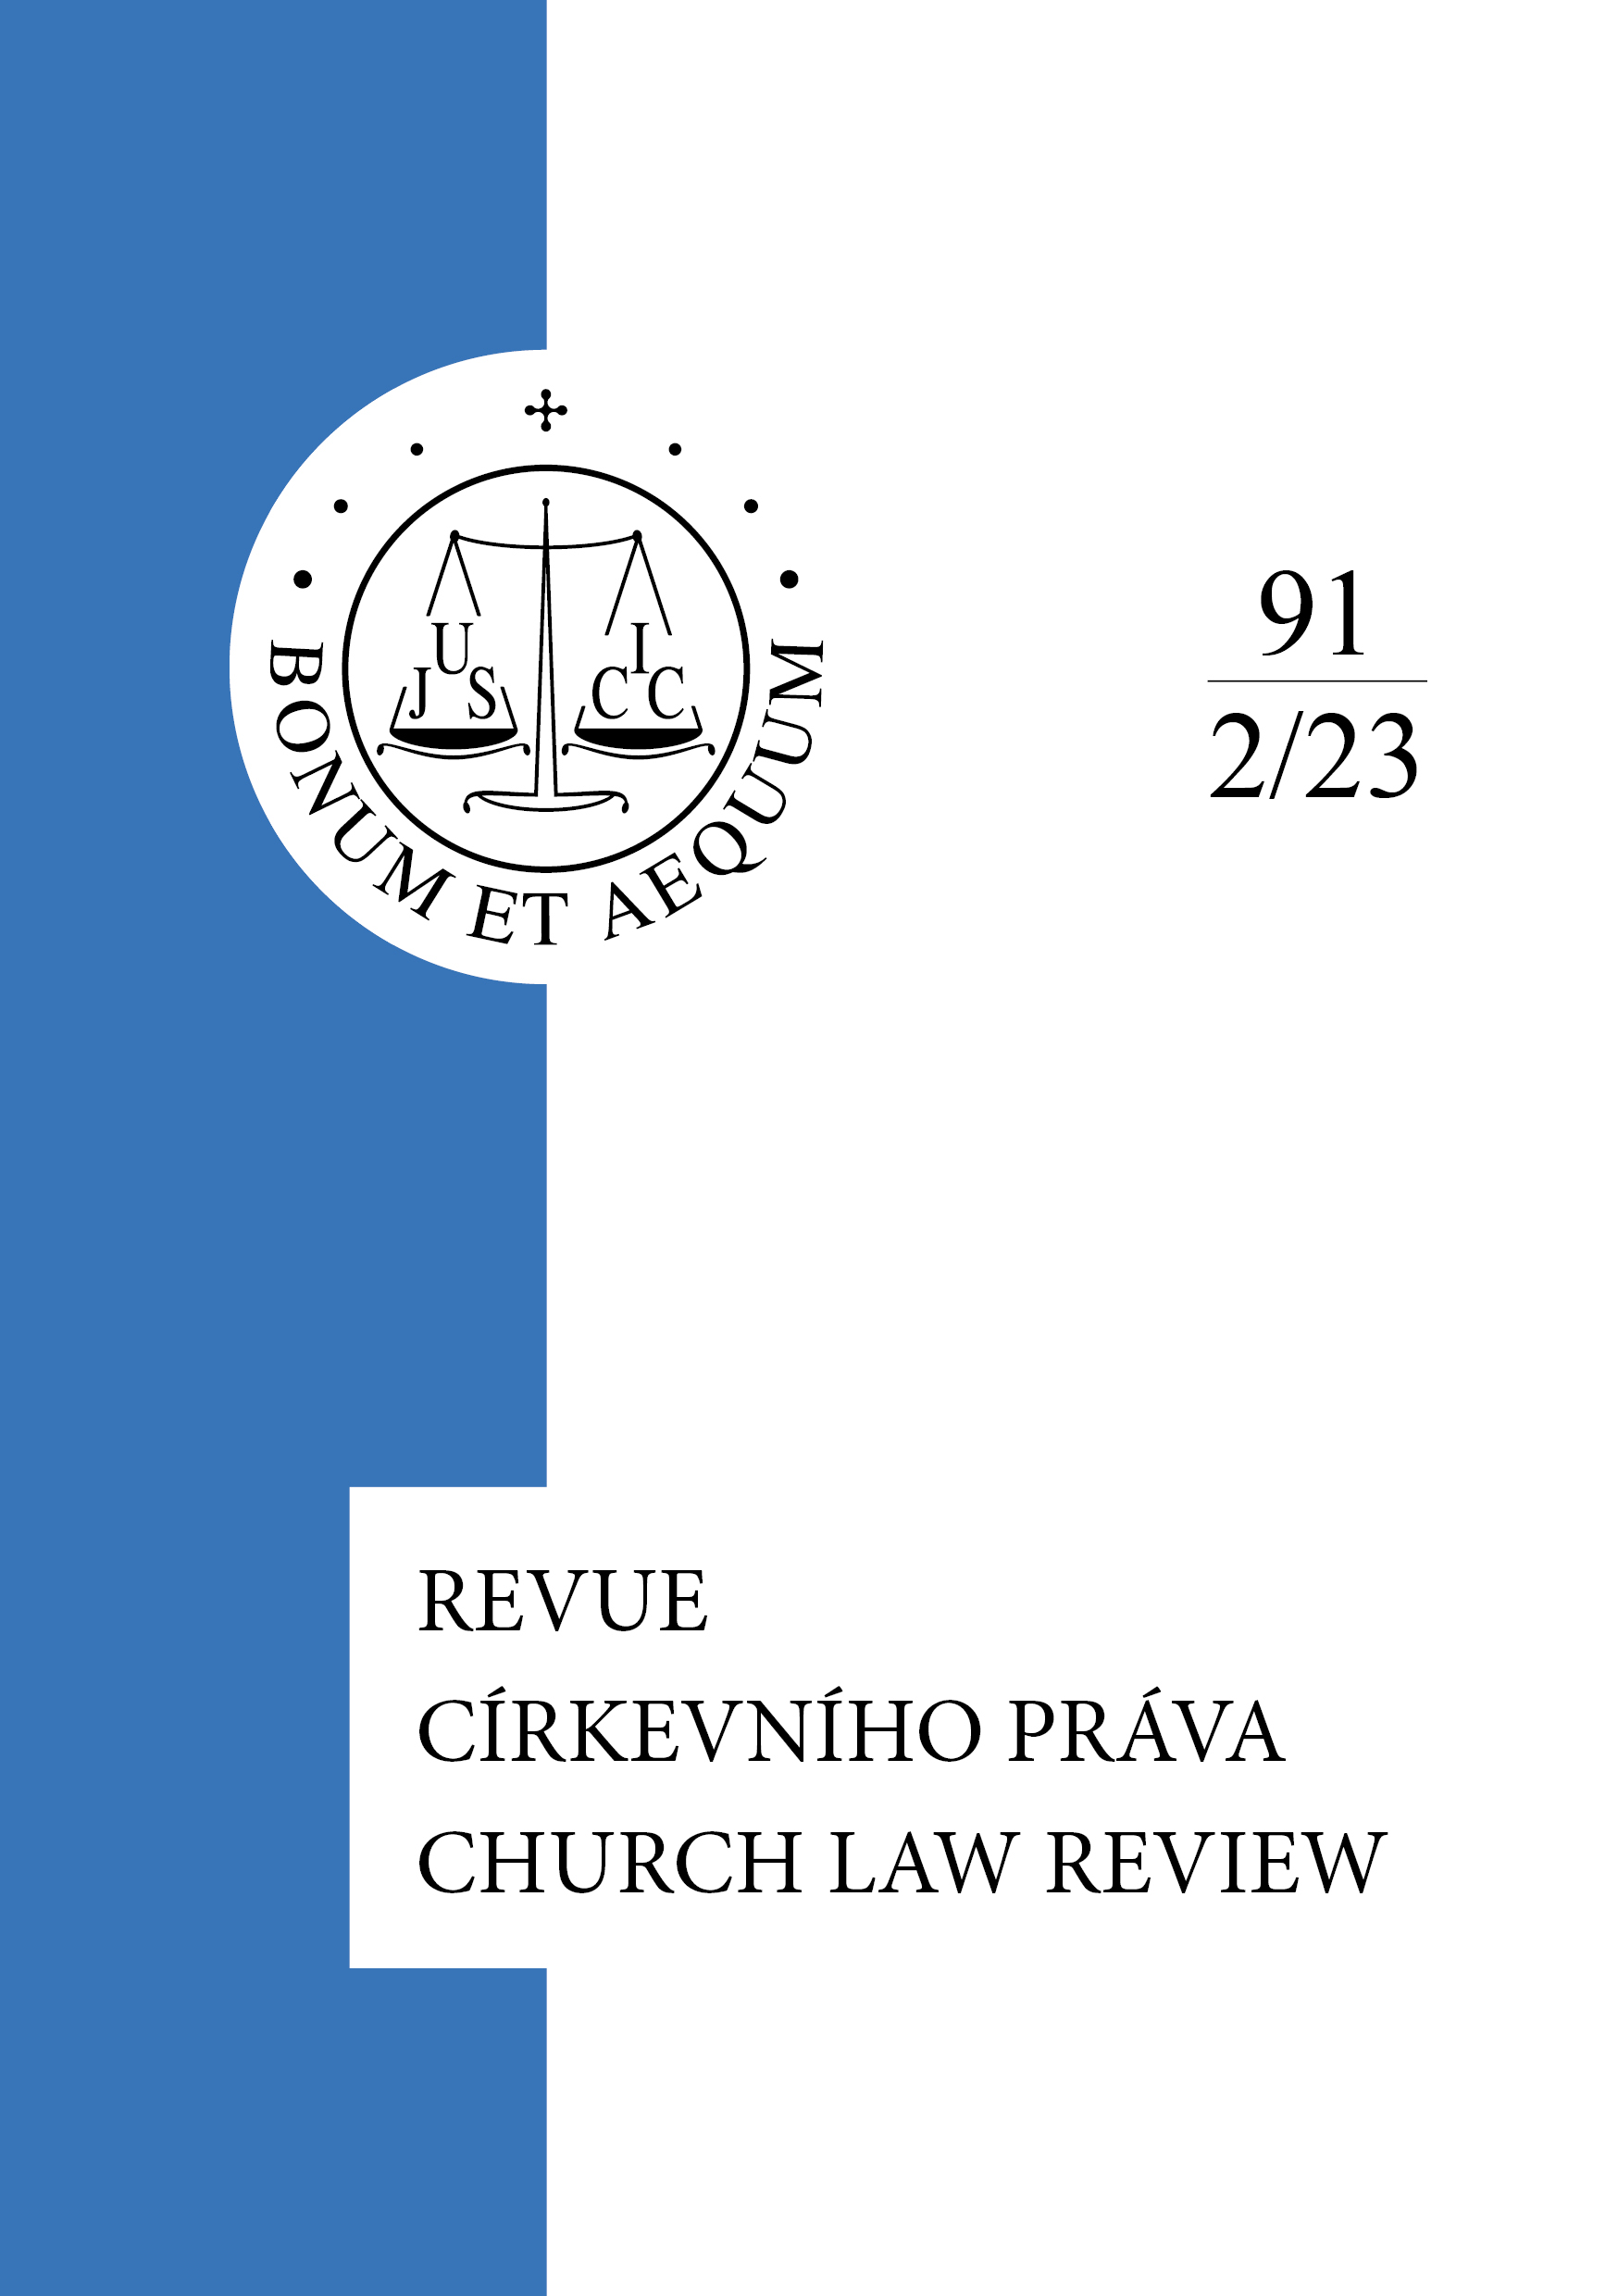 Fines in the System of Canonical Penalties of the Latin Catholic Church – History and Present Cover Image